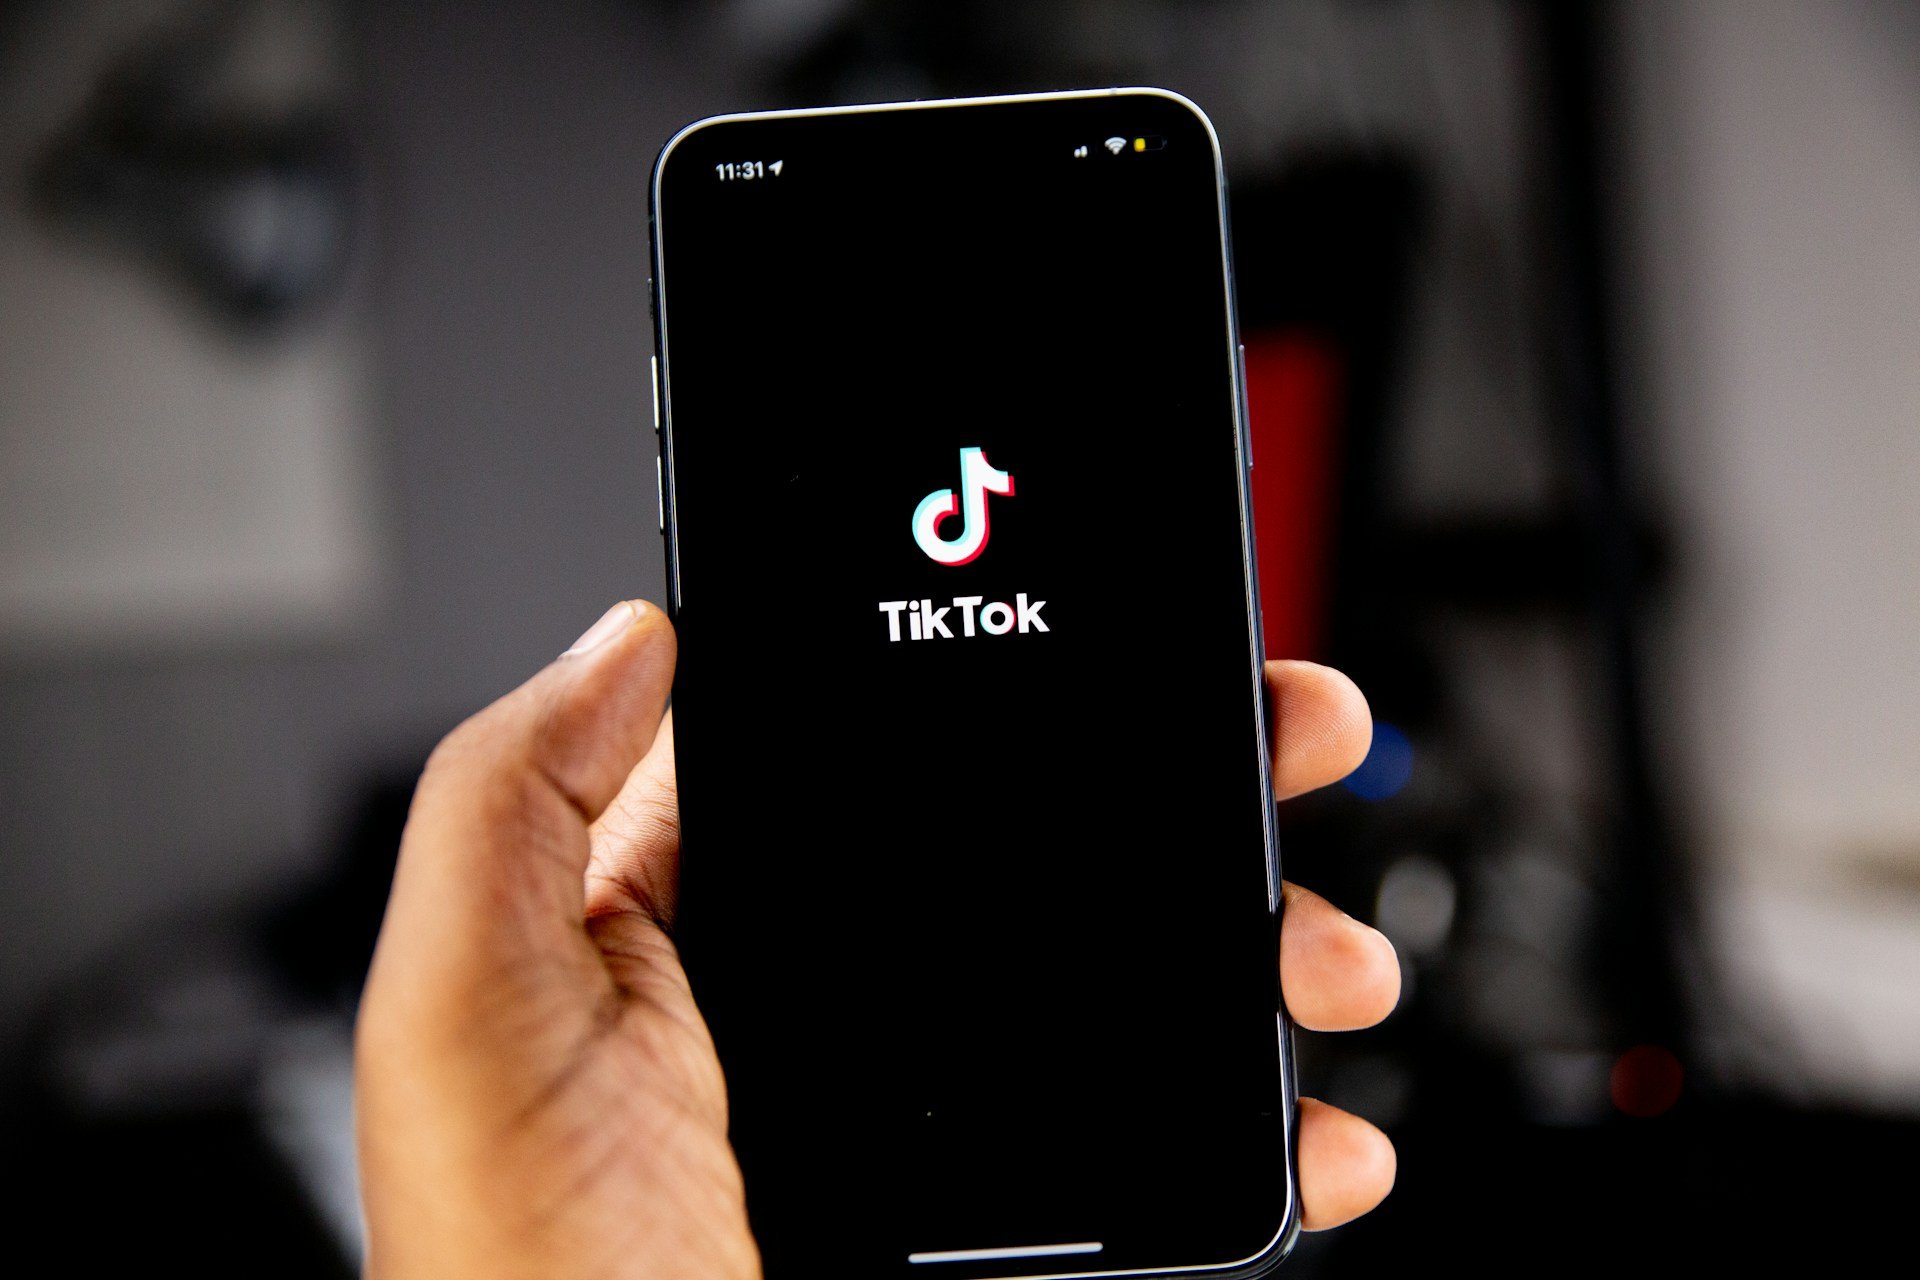 tiktok could face ban in USA